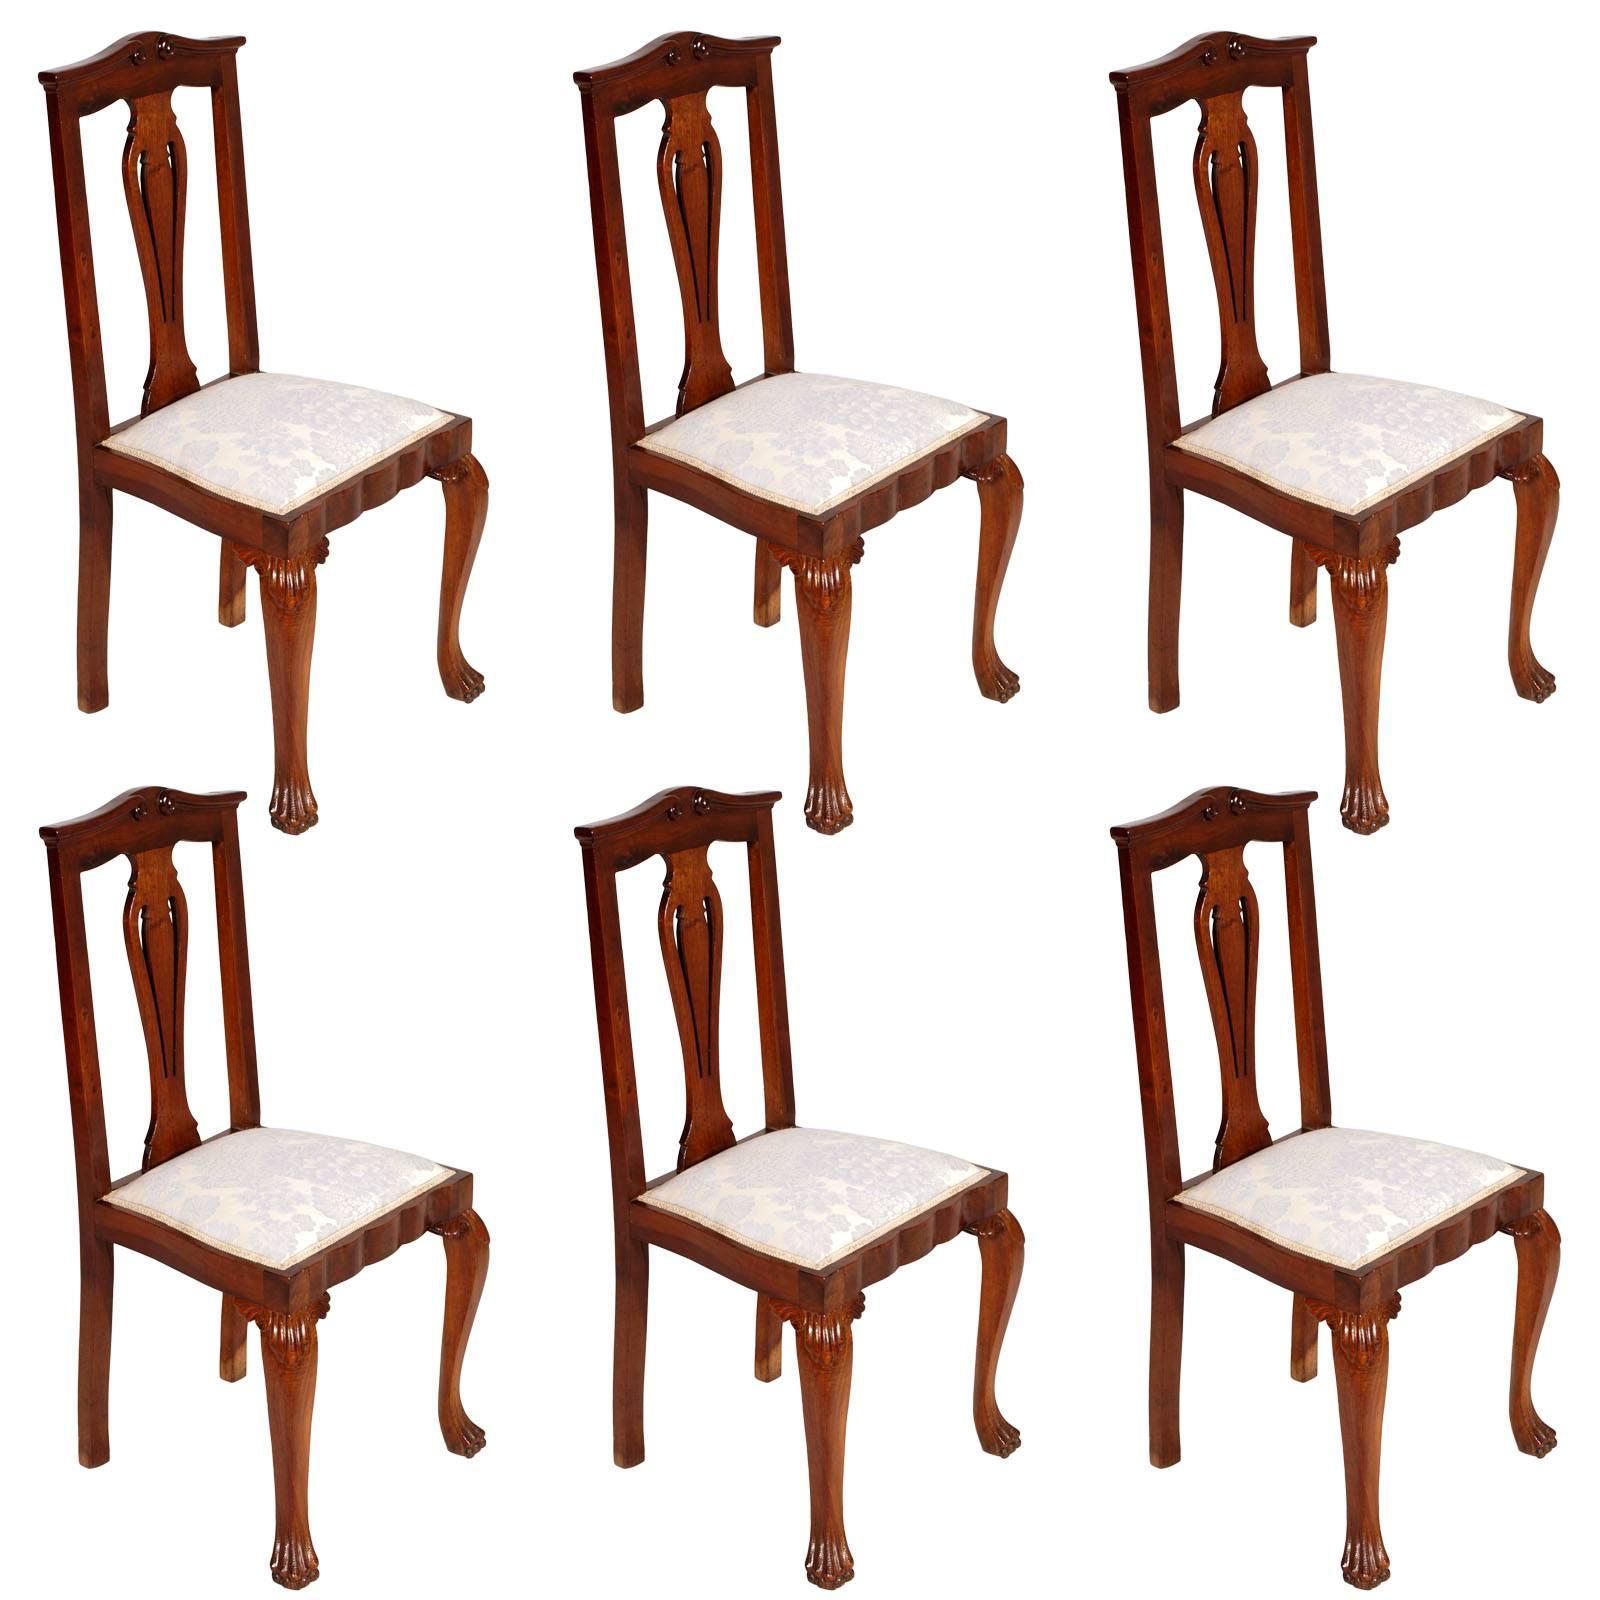 Early 20th Century Italian Set of Six Chippendale Chairs , hand-carved Walnut